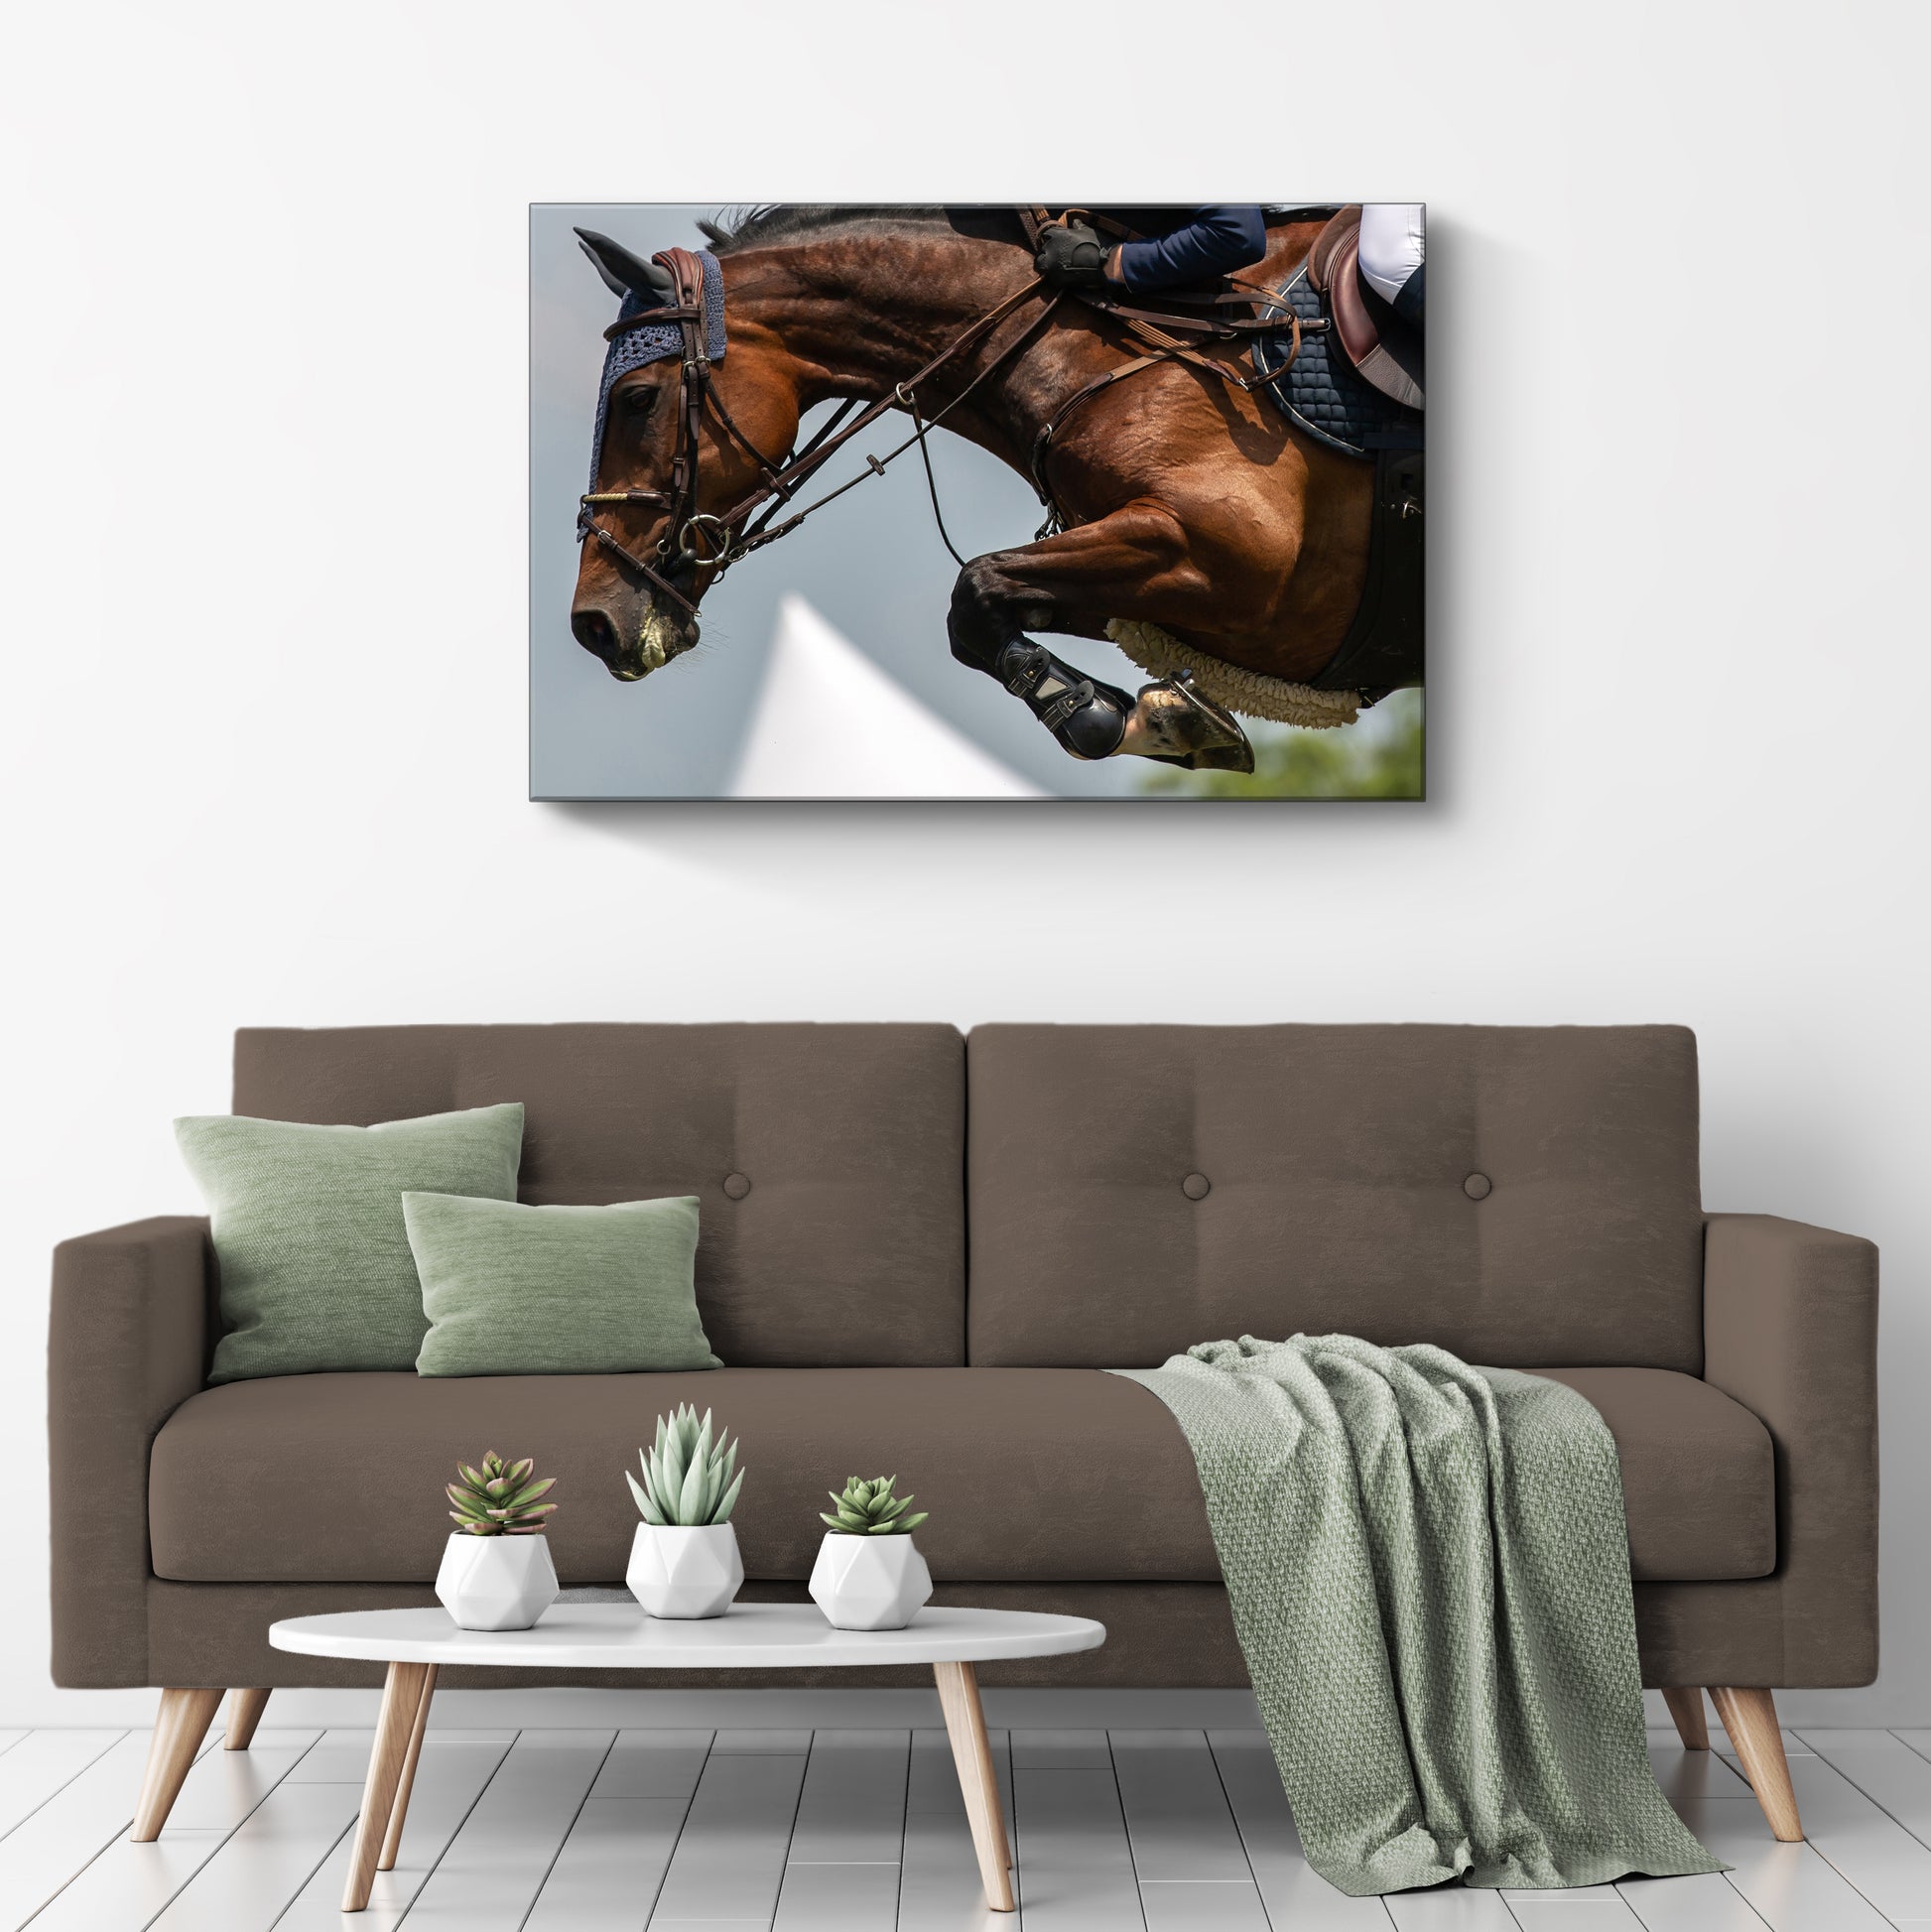 Equestrian Jumping Show Canvas Wall Art - Image by Tailored Canvases